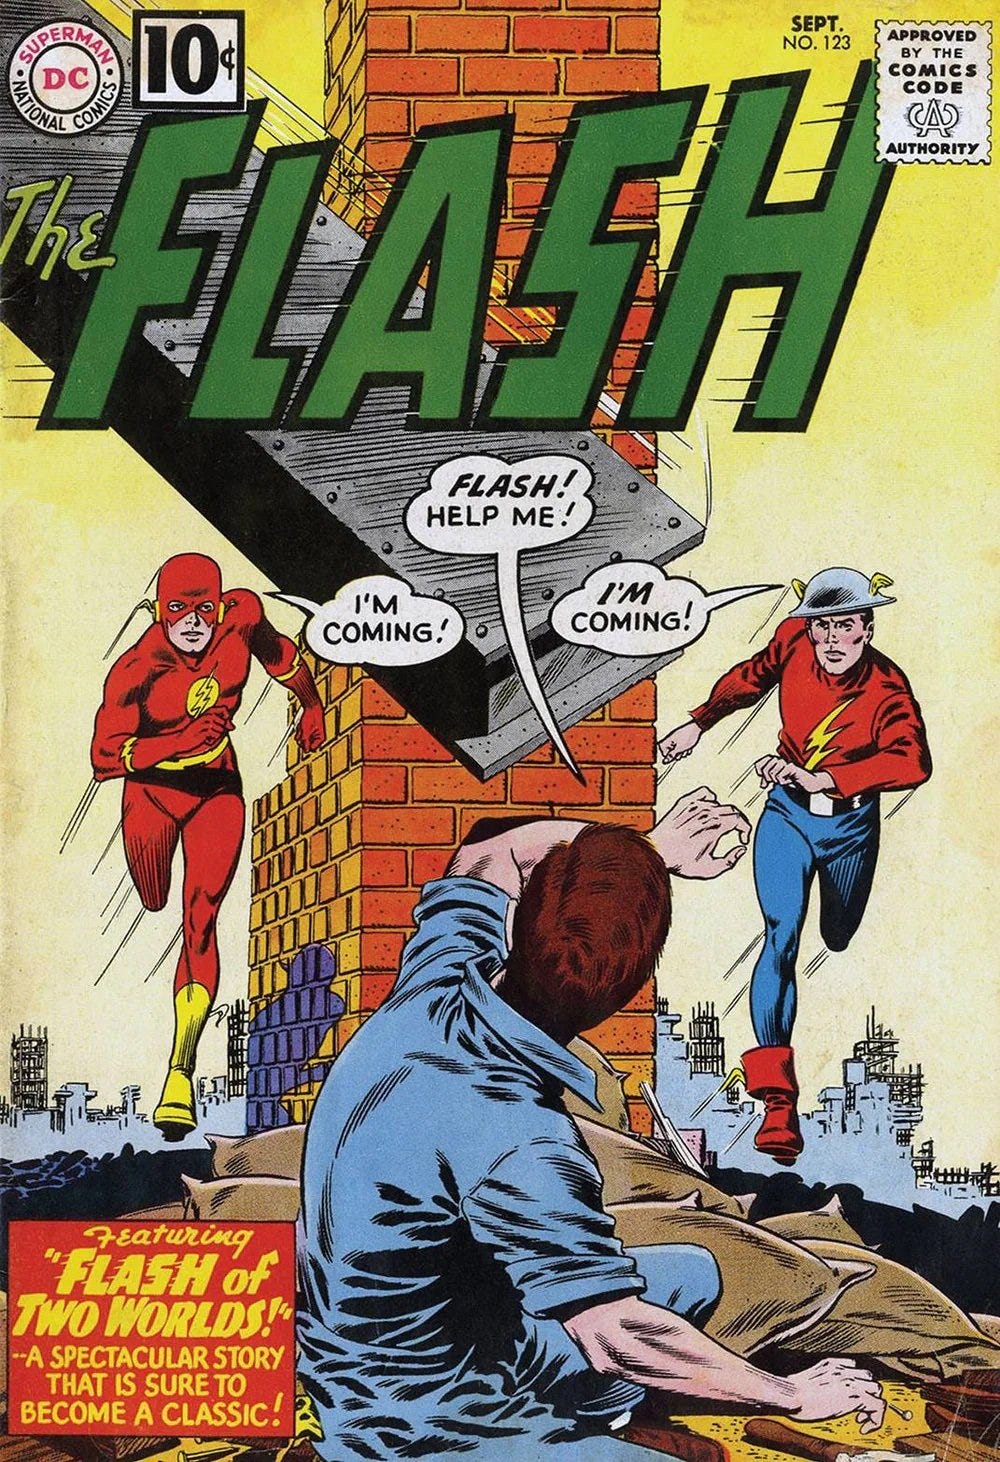 the cover of the first Flash comic were Earth 1 and Earth 2 Flash meet. They are two superheroes in different red costumes racing from opposites sides of a brick wall to go help a person who’s fallen between.